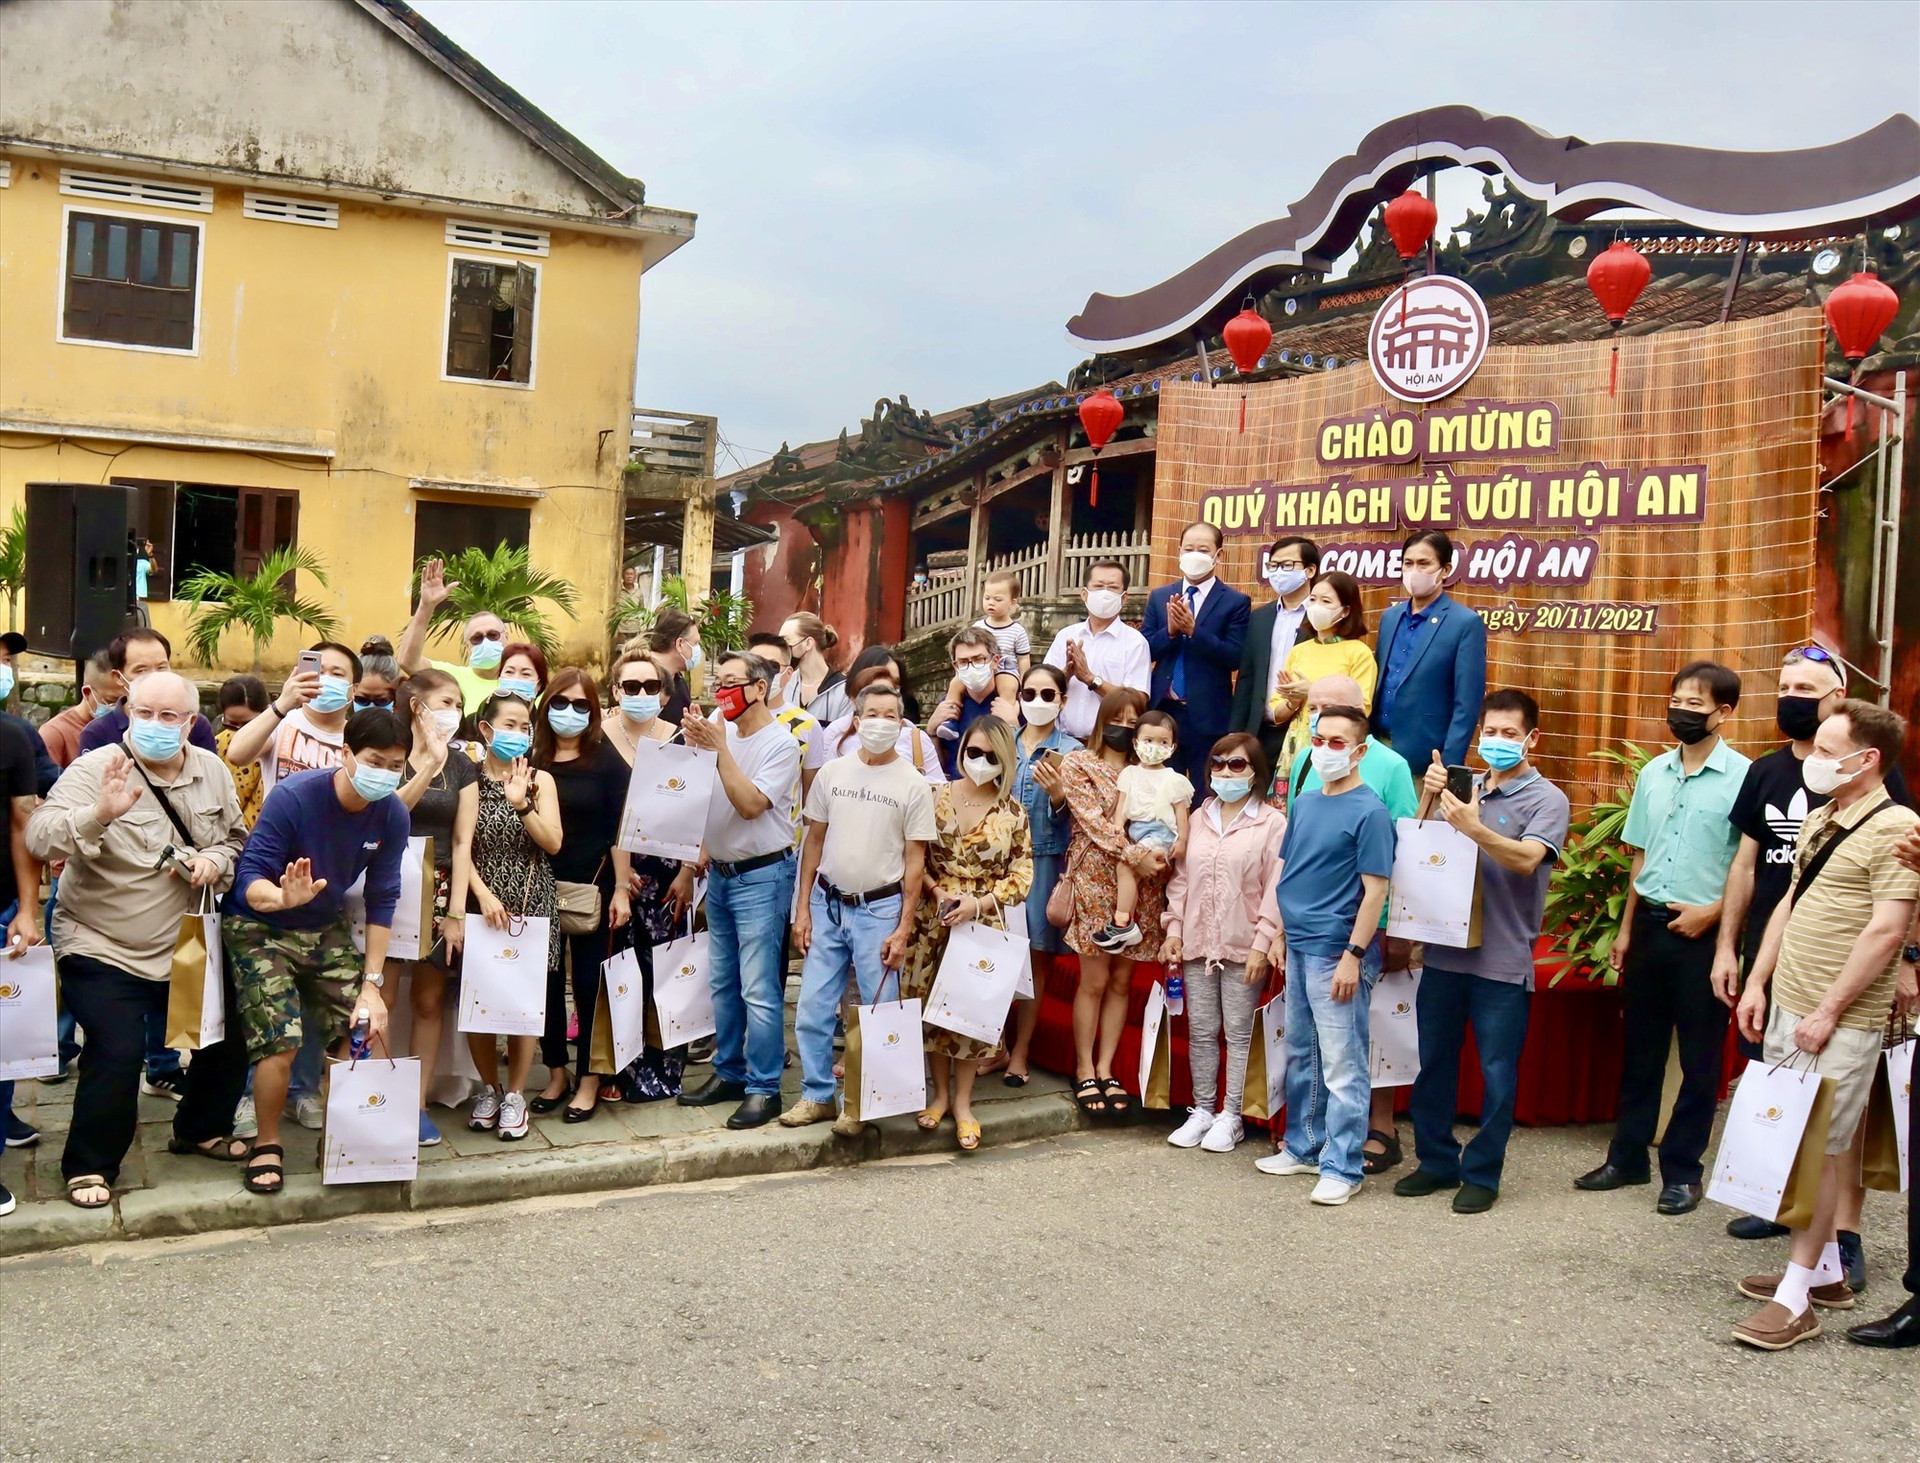 The first delegation of international tourists in Hoi An after 2 years.